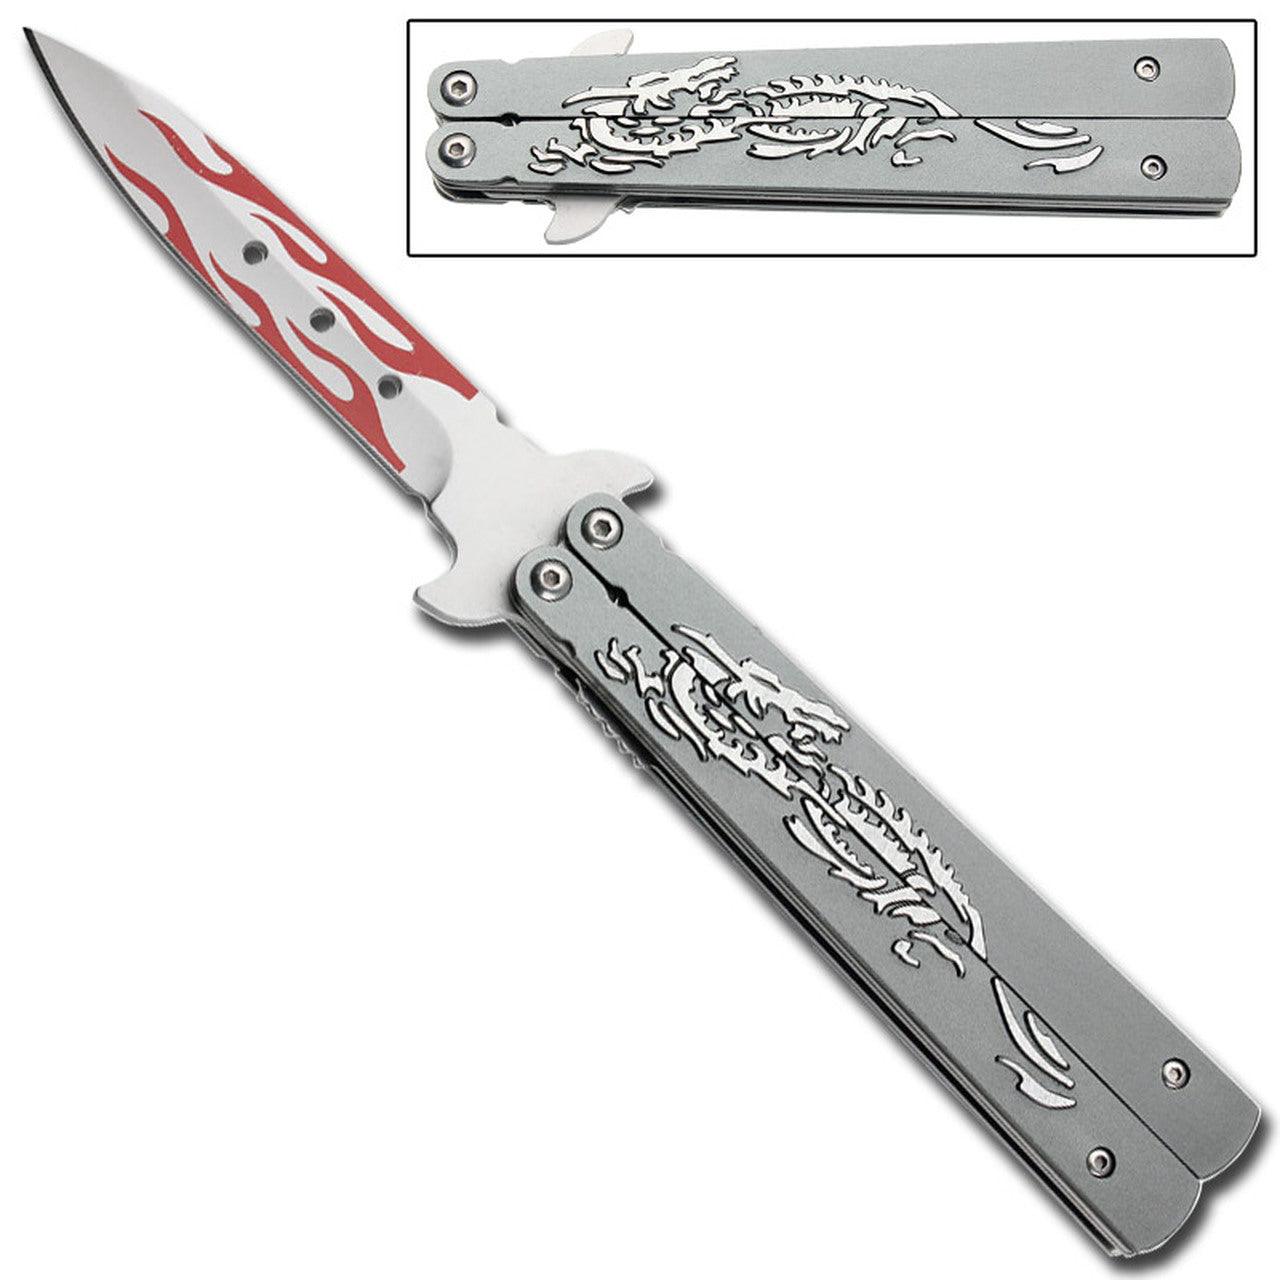 Dragon Flame Spring Assist Knife - Field Grey-0